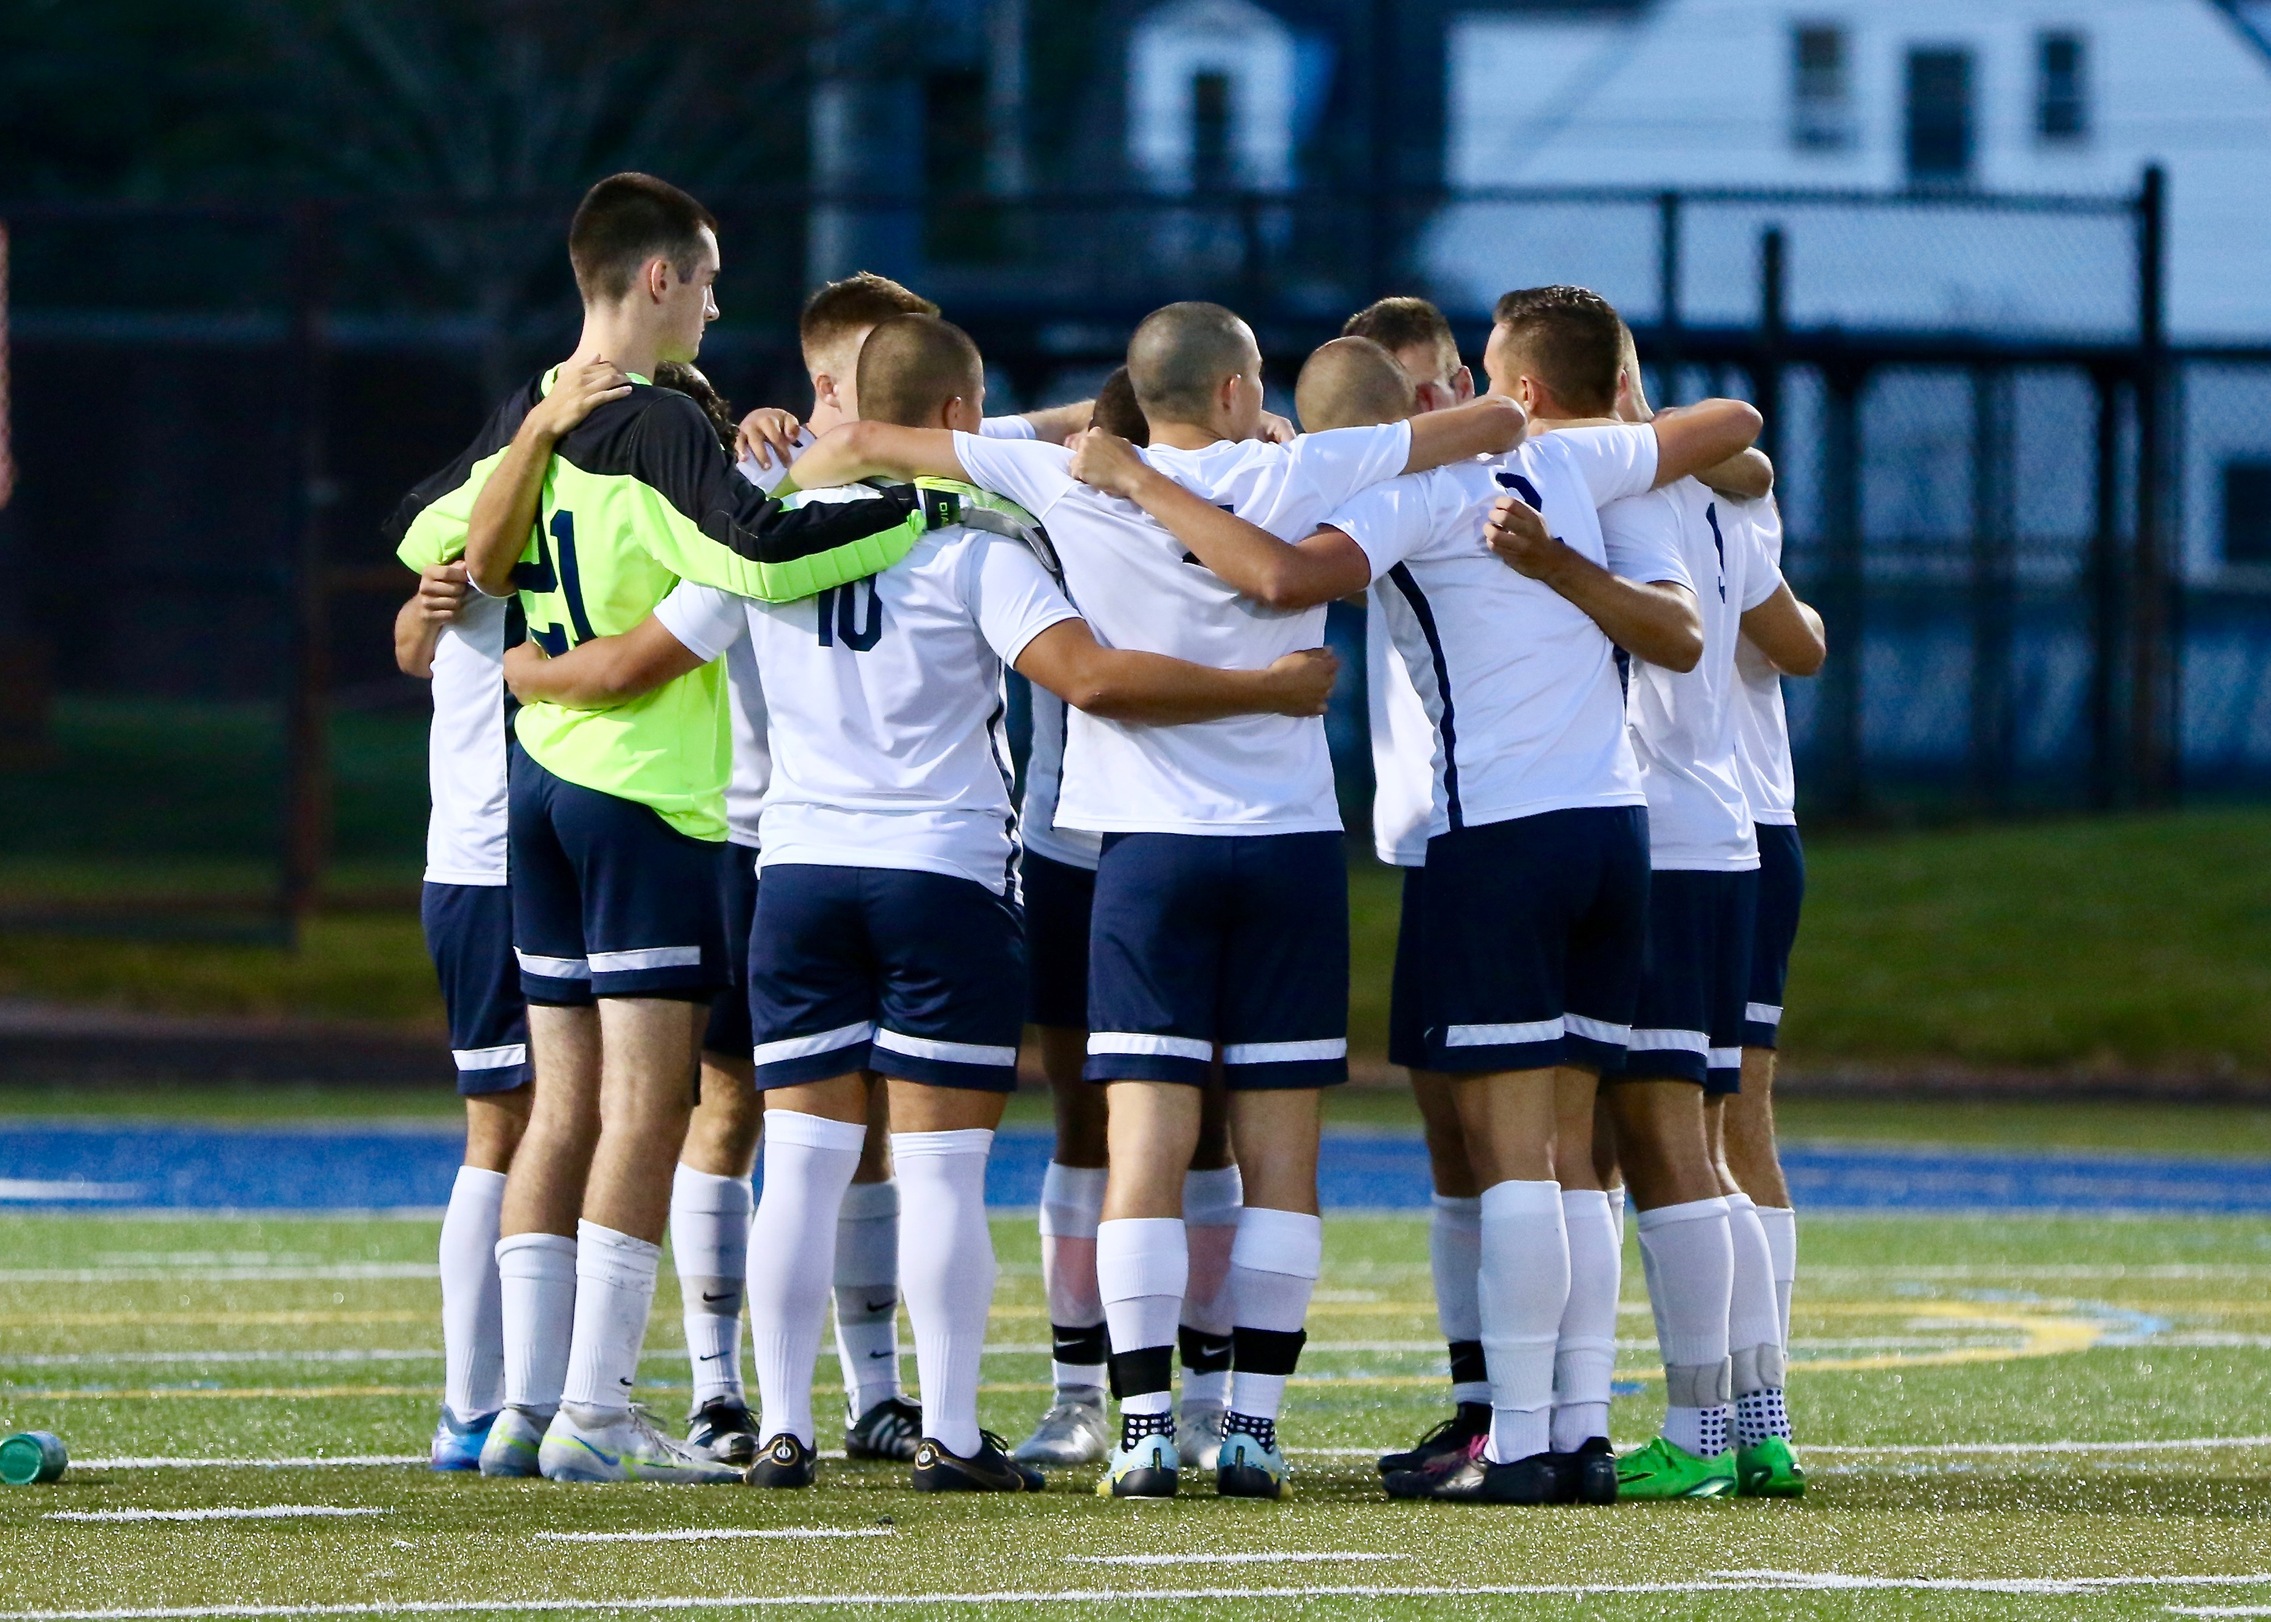 Men's Soccer Bucs Drop Close Conference Game to Vikings